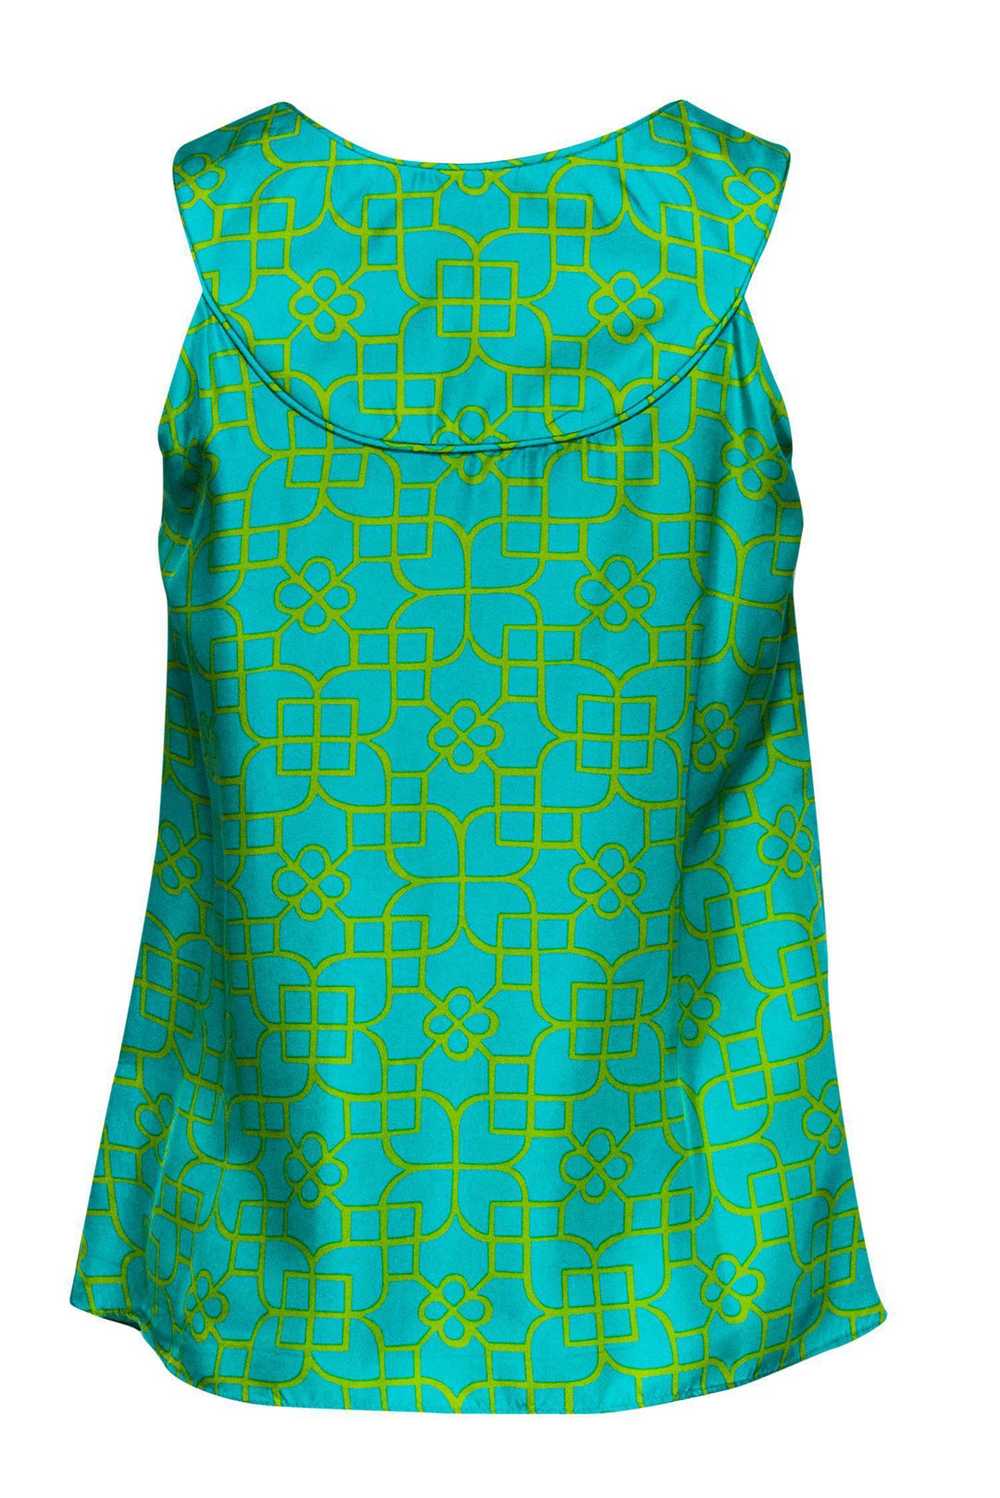 Milly - Bright Green & Blue Printed Embellished T… - image 3